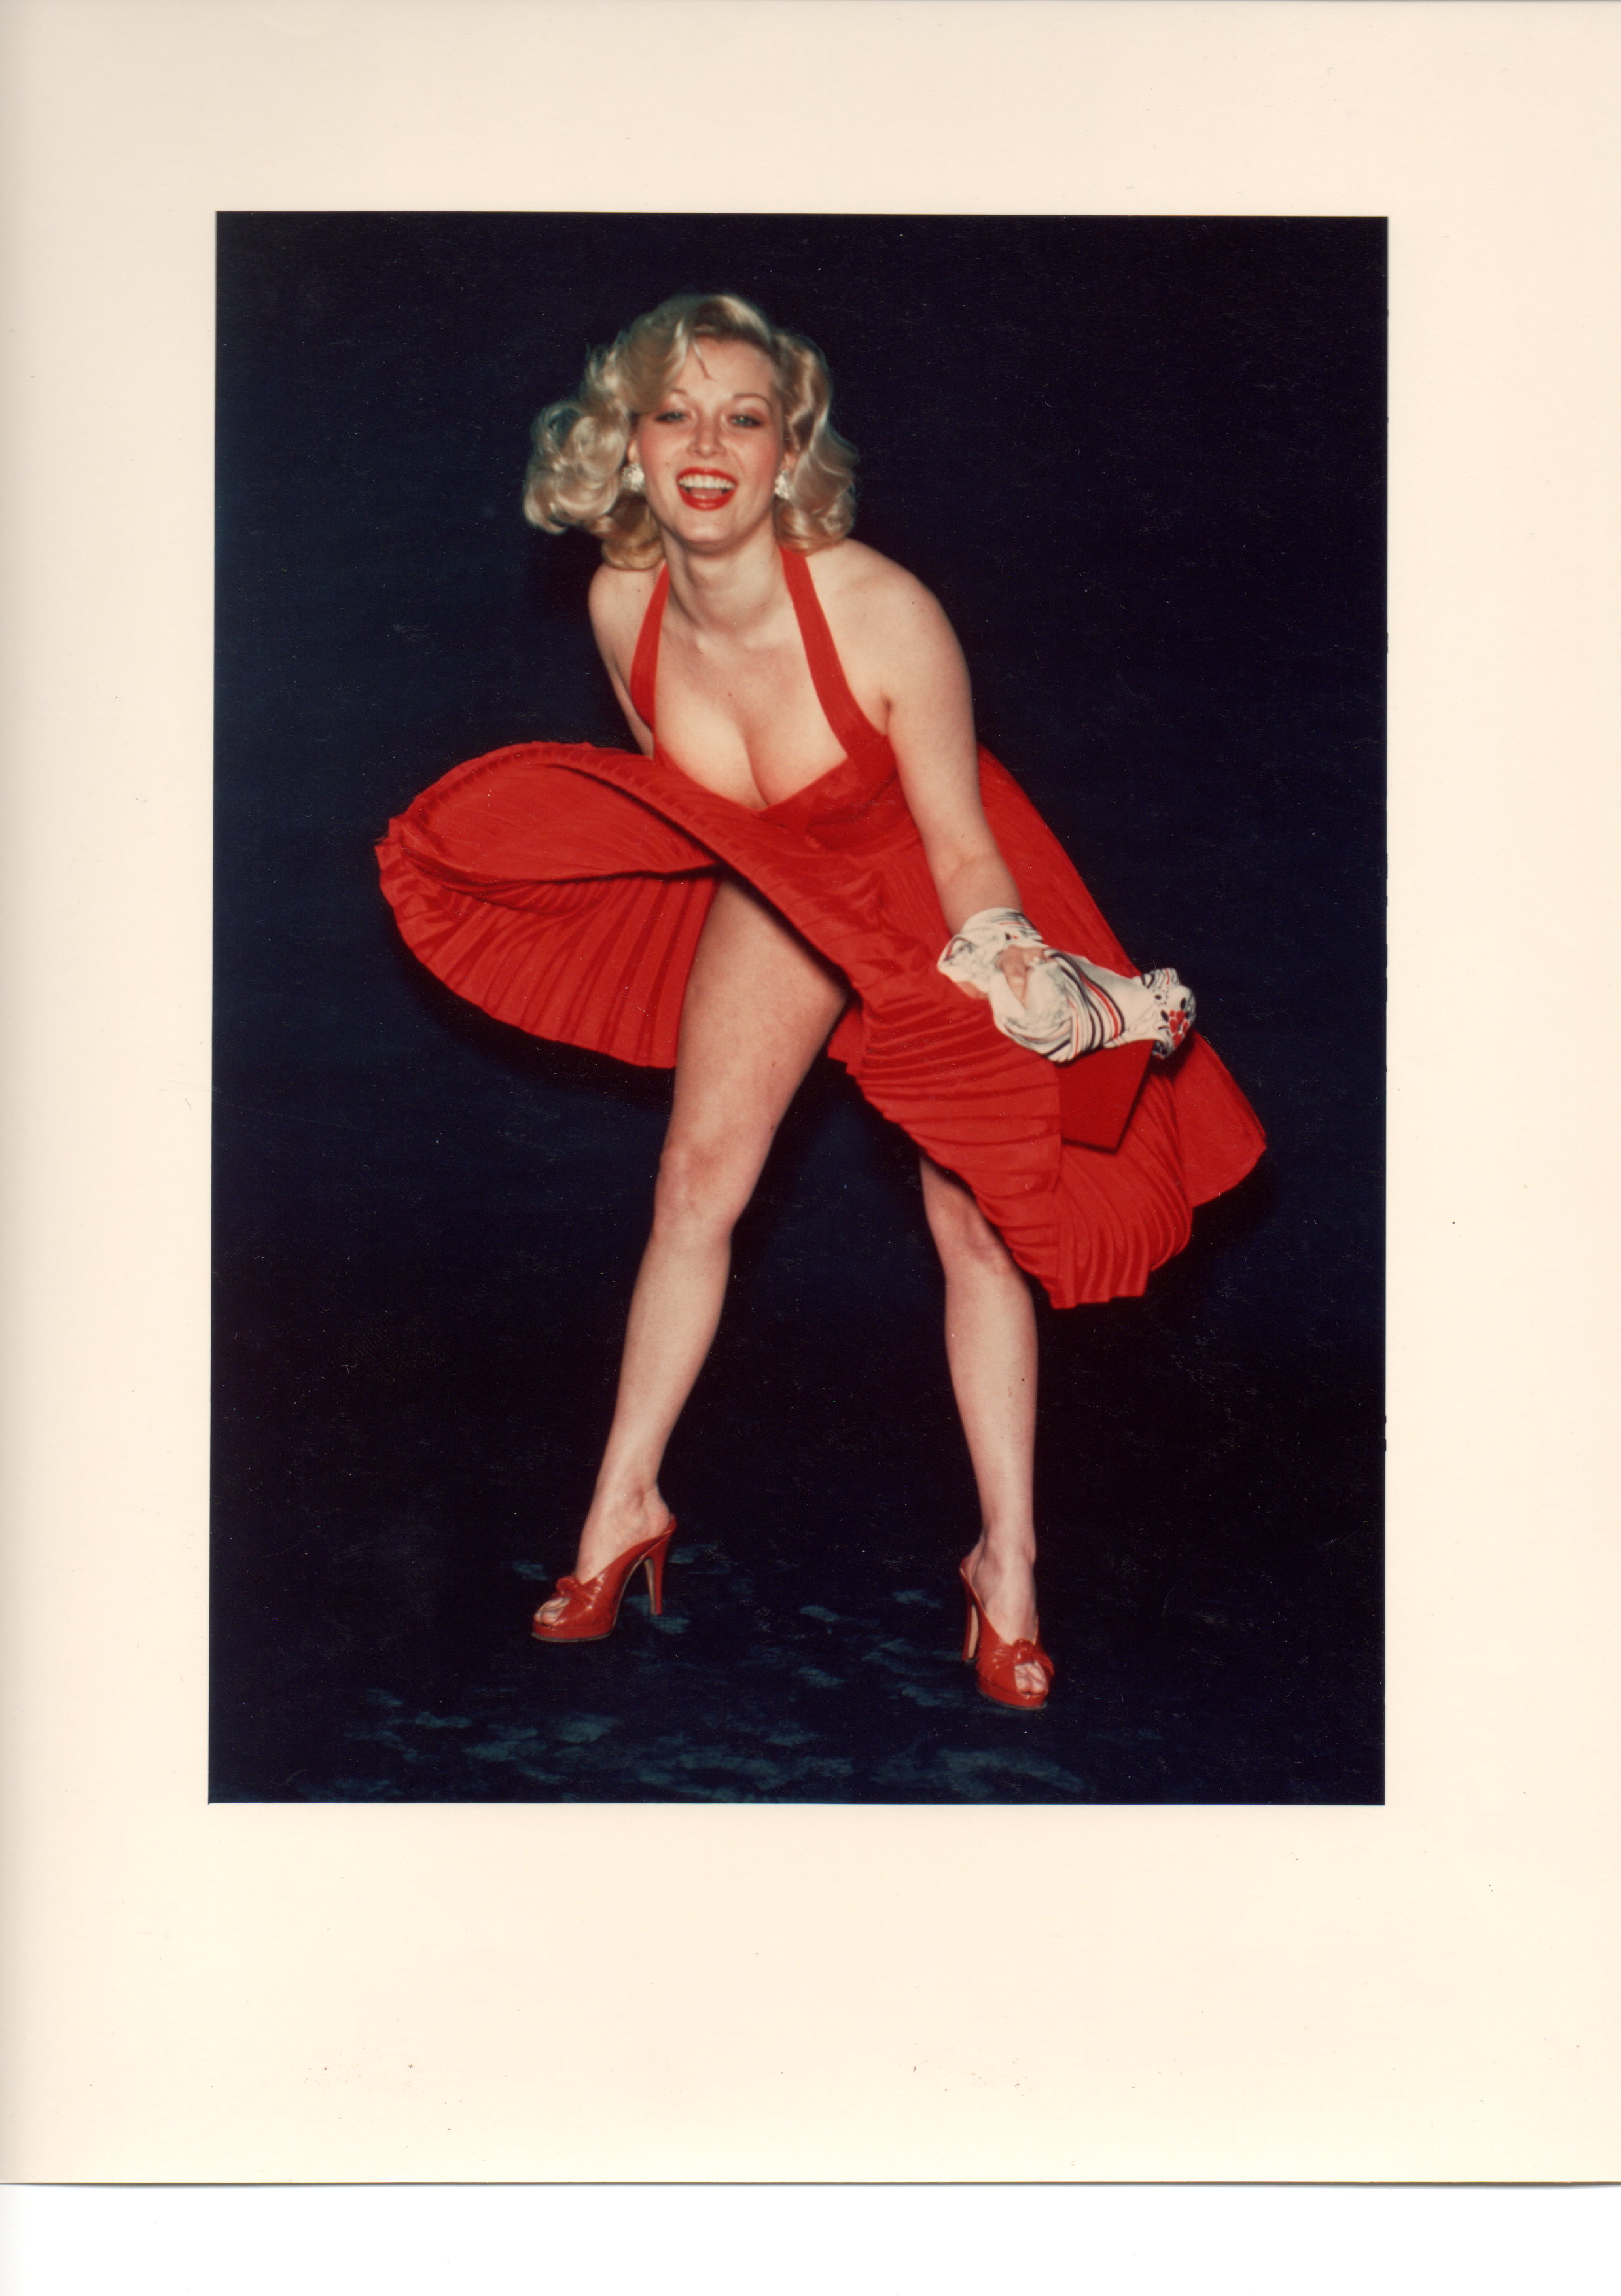 Lindy as Marilyn Monroe for Sun newspaper TV commercial.